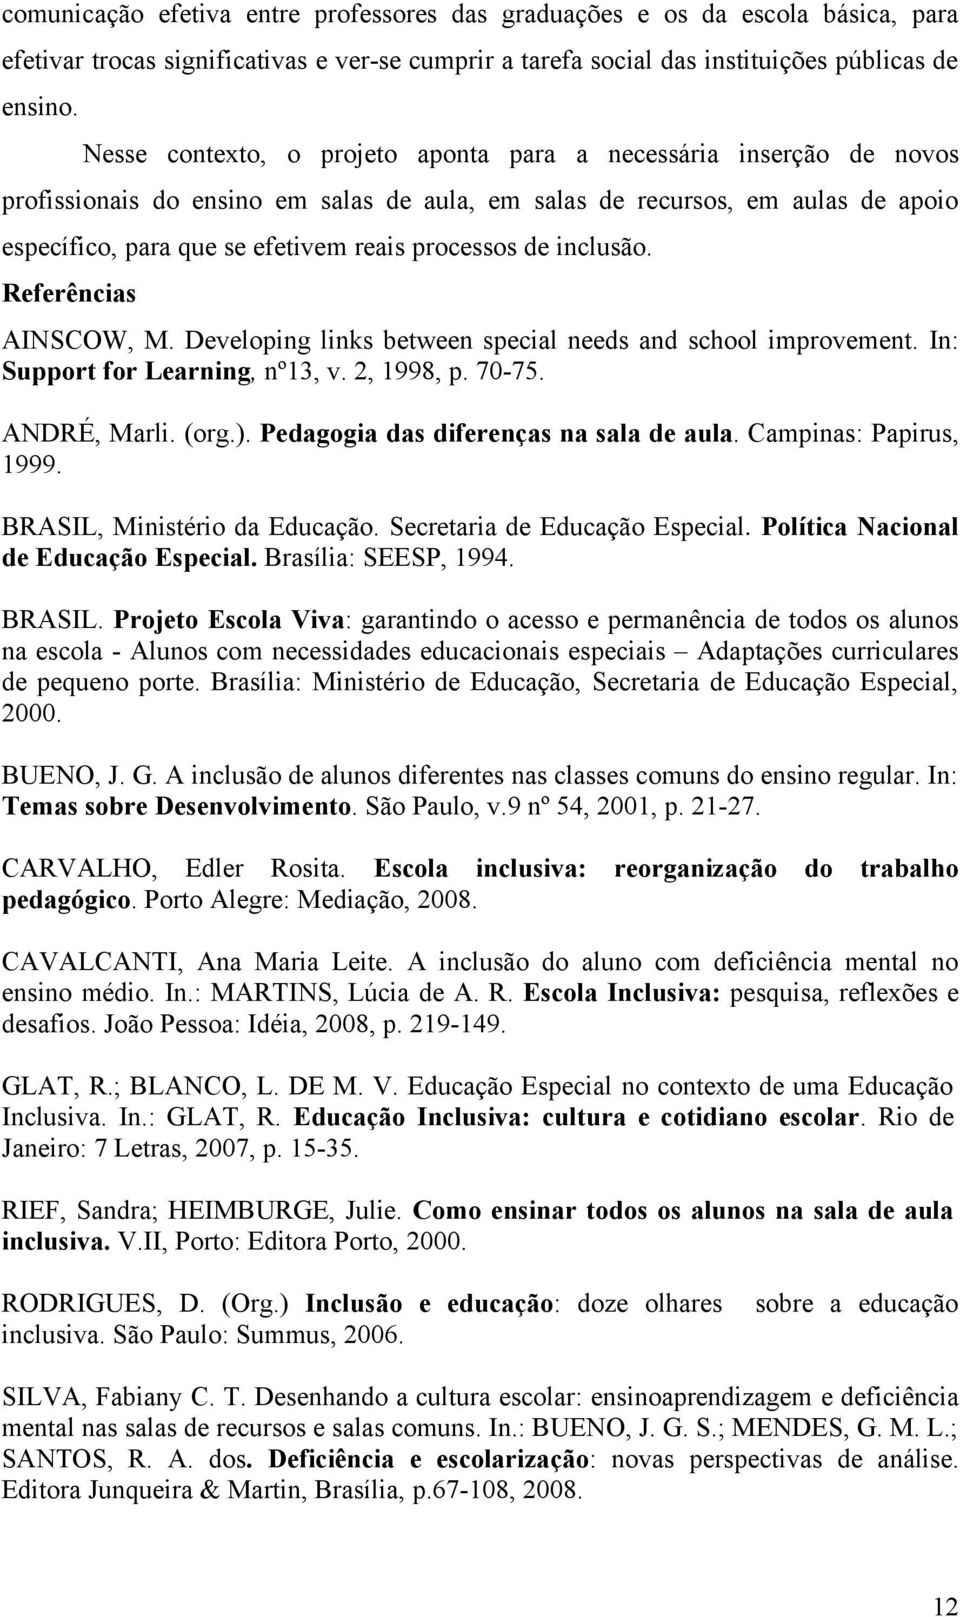 de inclusão. Referências AINSCOW, M. Developing links between special needs and school improvement. In: Support for Learning, nº13, v. 2, 1998, p. 70-75. ANDRÉ, Marli. (org.).